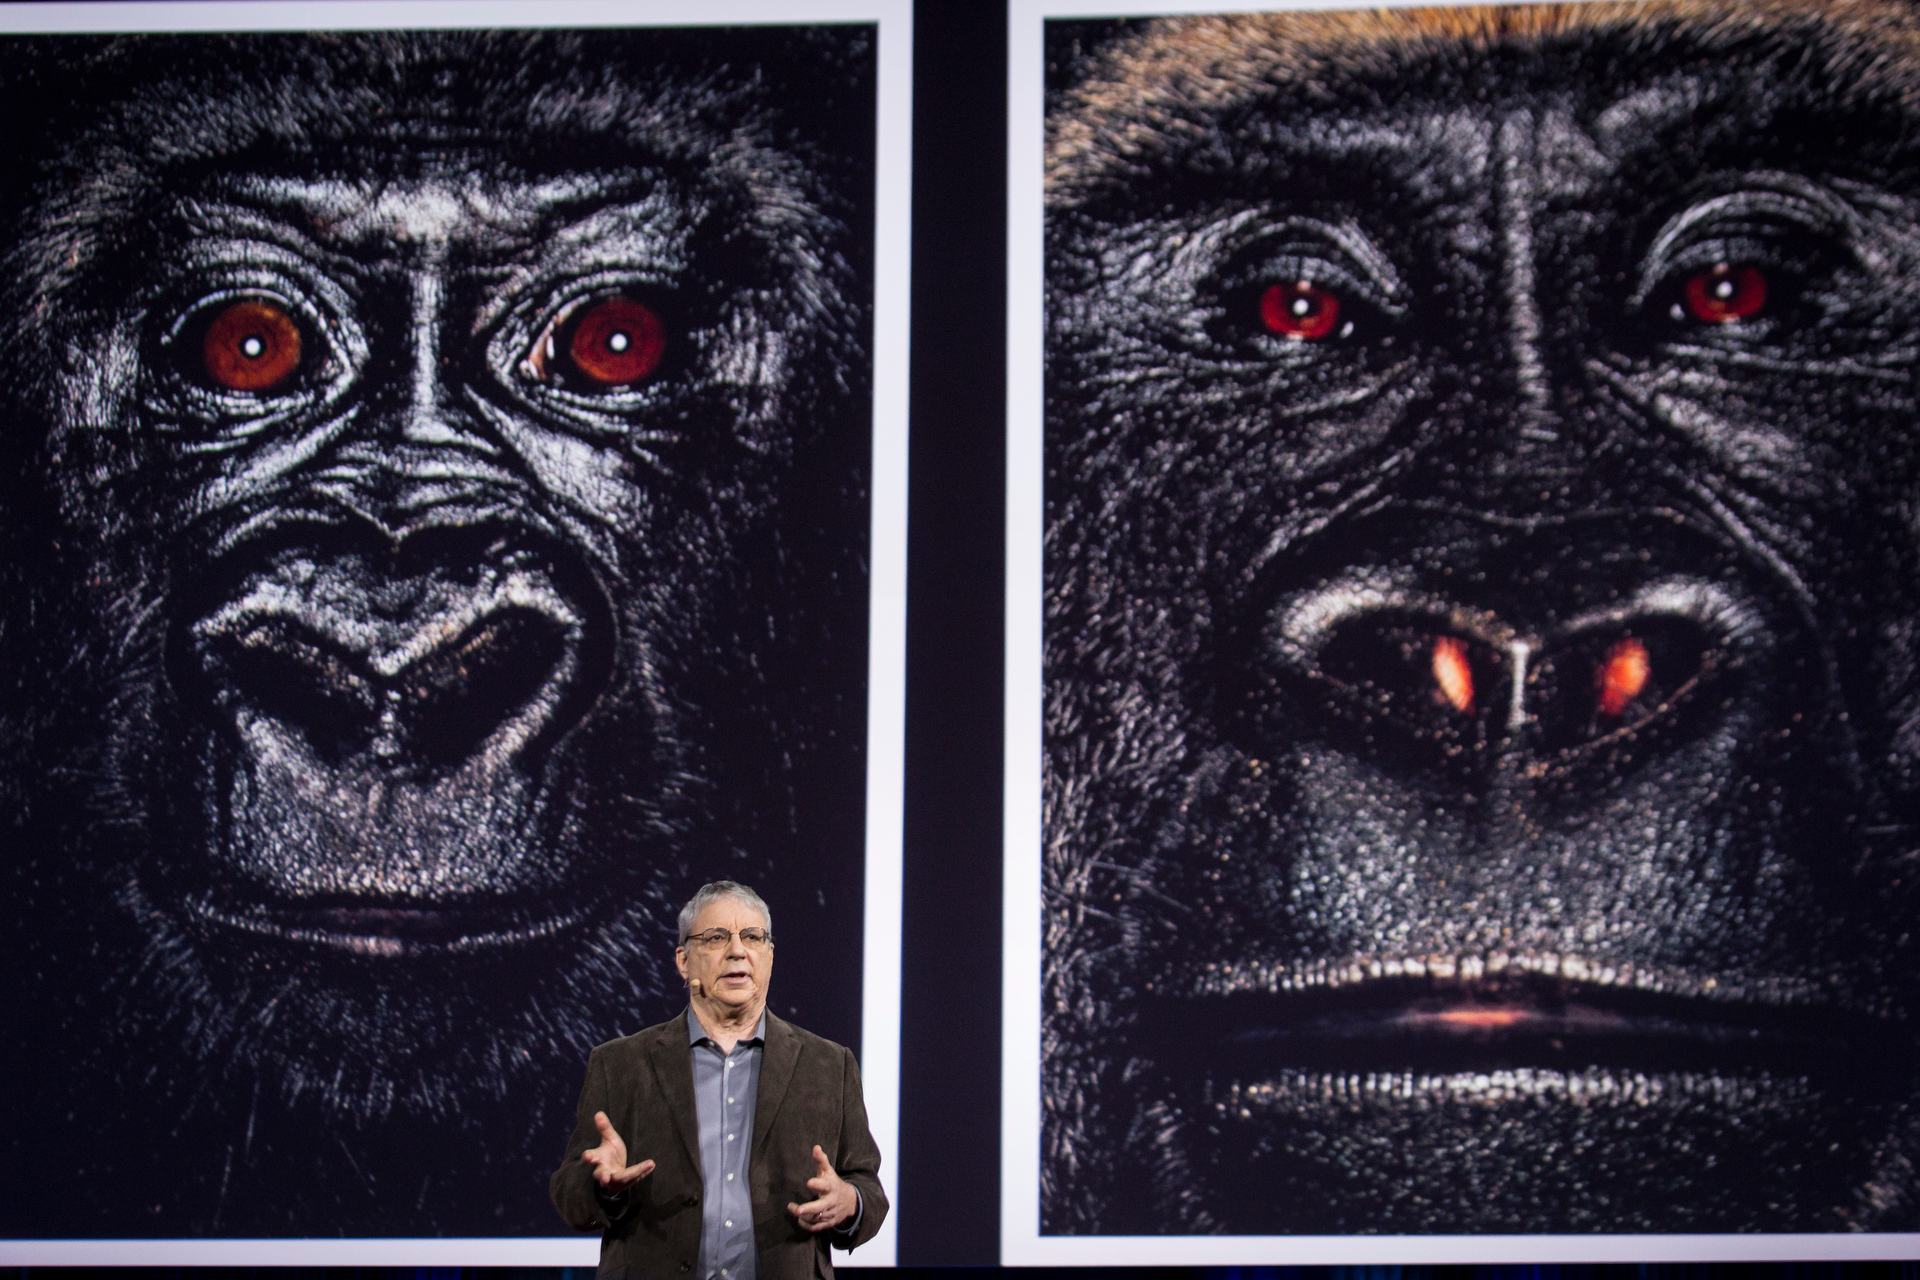 Steven Wise speaks at TED2015 - Truth and Dare, Session 6. Photo: Bret Hartman/TED